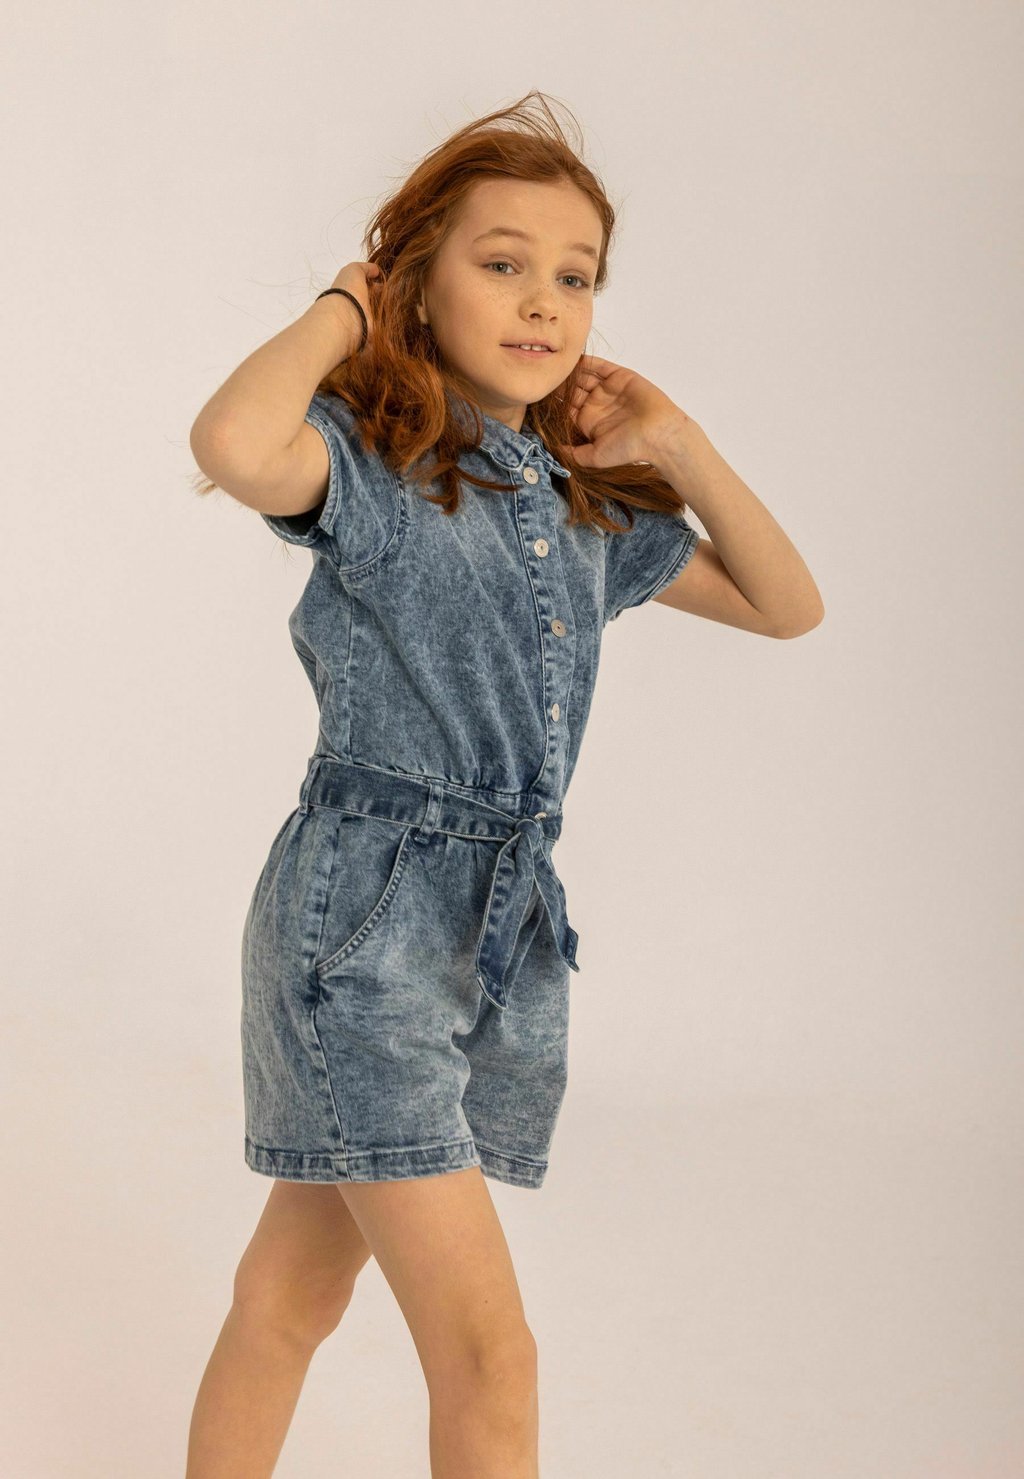 Комбинезон MINOTI, цвет light blue demin ladiguard 2021 sexy hollow out jeans demin jumpsuits plus size women sleeveless notched bodysuits fringed ripped demin overalls